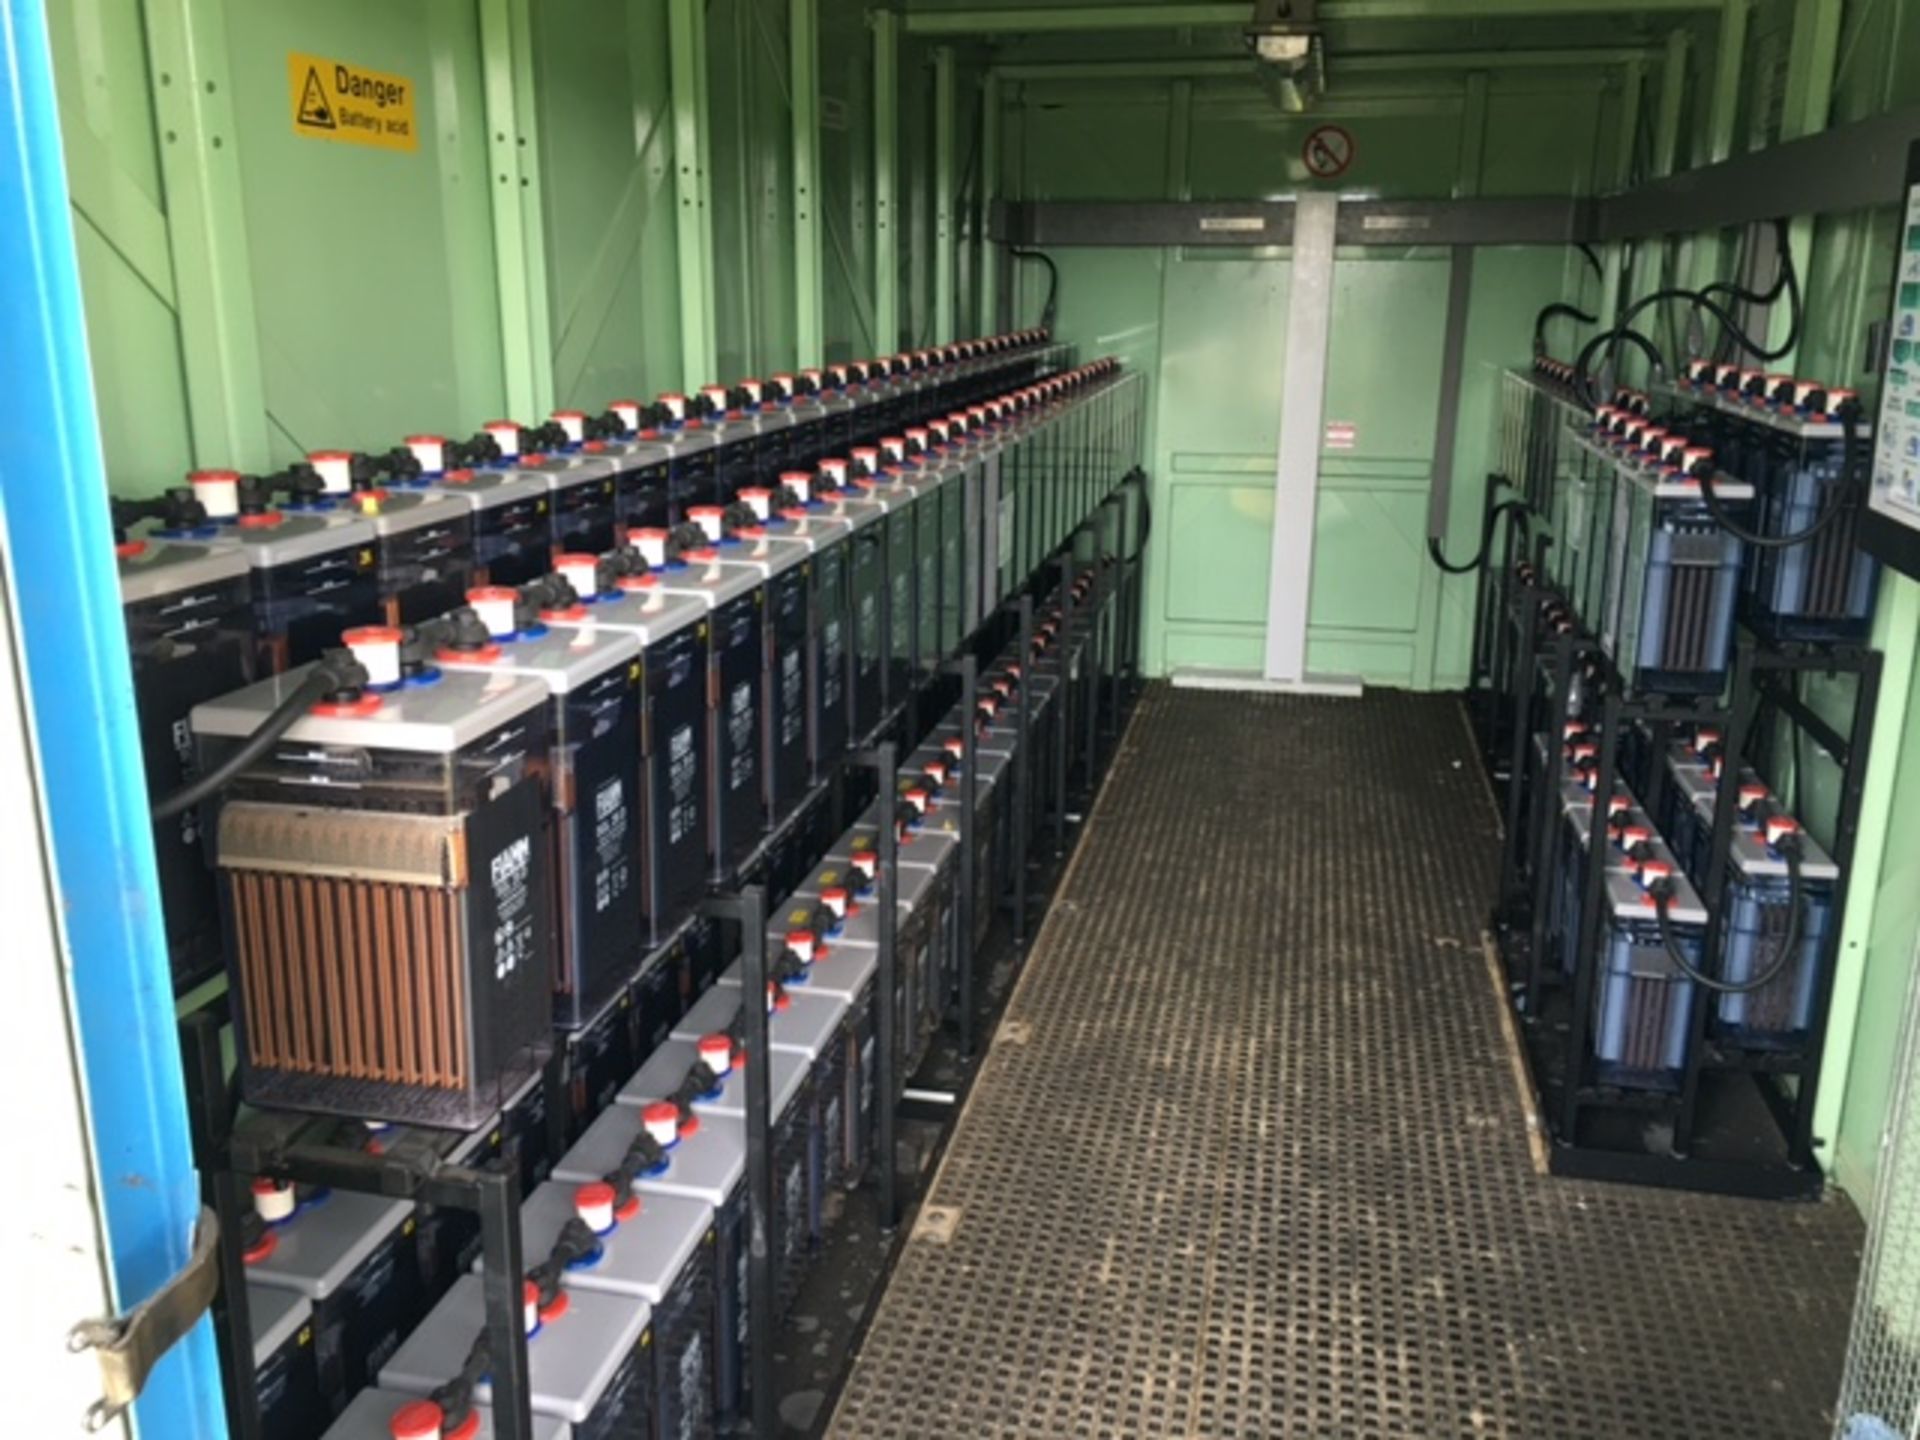 Contents of Battery Room - 102 Batteries